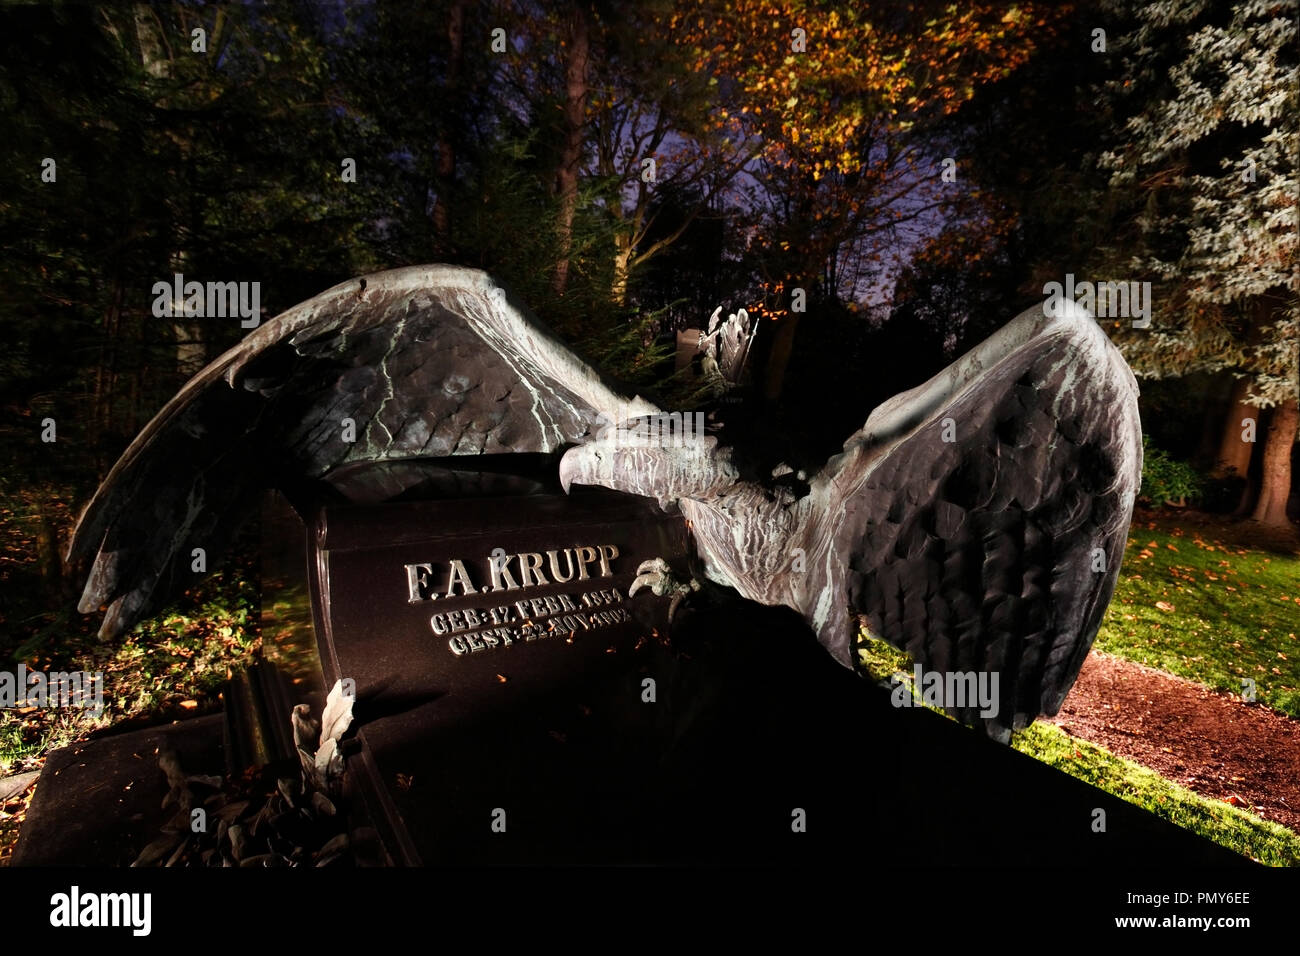 At the municipal cemetery Essen-Bredeney there is a separate area where the graves of the Krupp family are located. The tomb of Friedrich Alfred Krupp, is made of dark granite and is adorned by a huge bronze eagle. Stock Photo